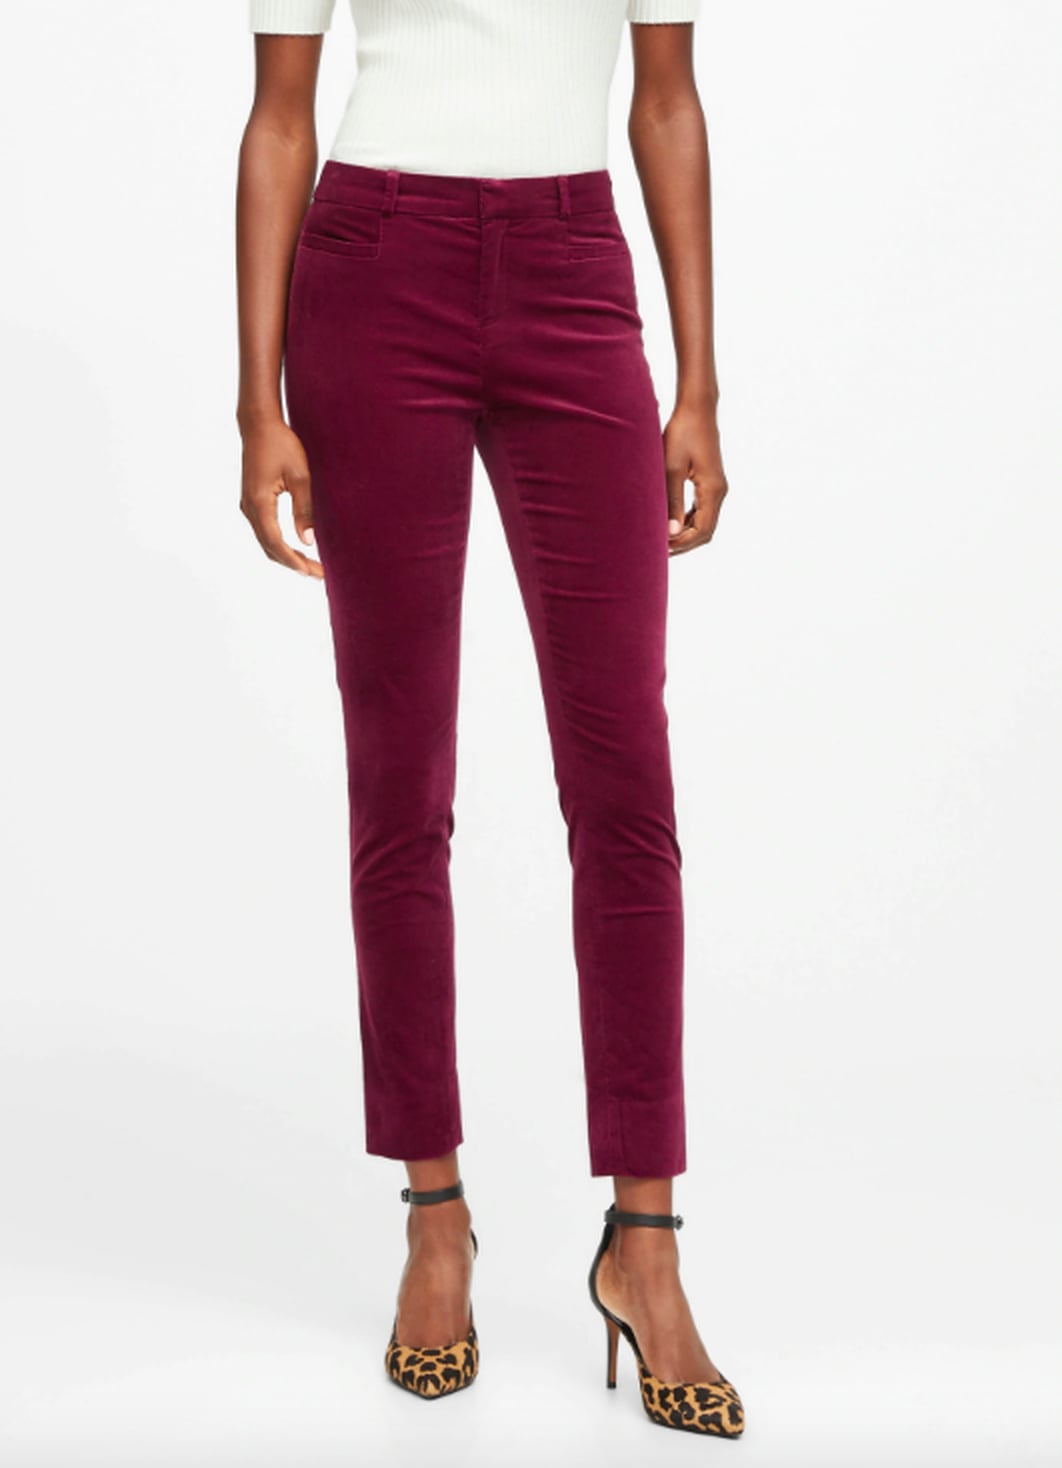 The Most Festive Red Clothing For Women at Banana Republic | POPSUGAR ...